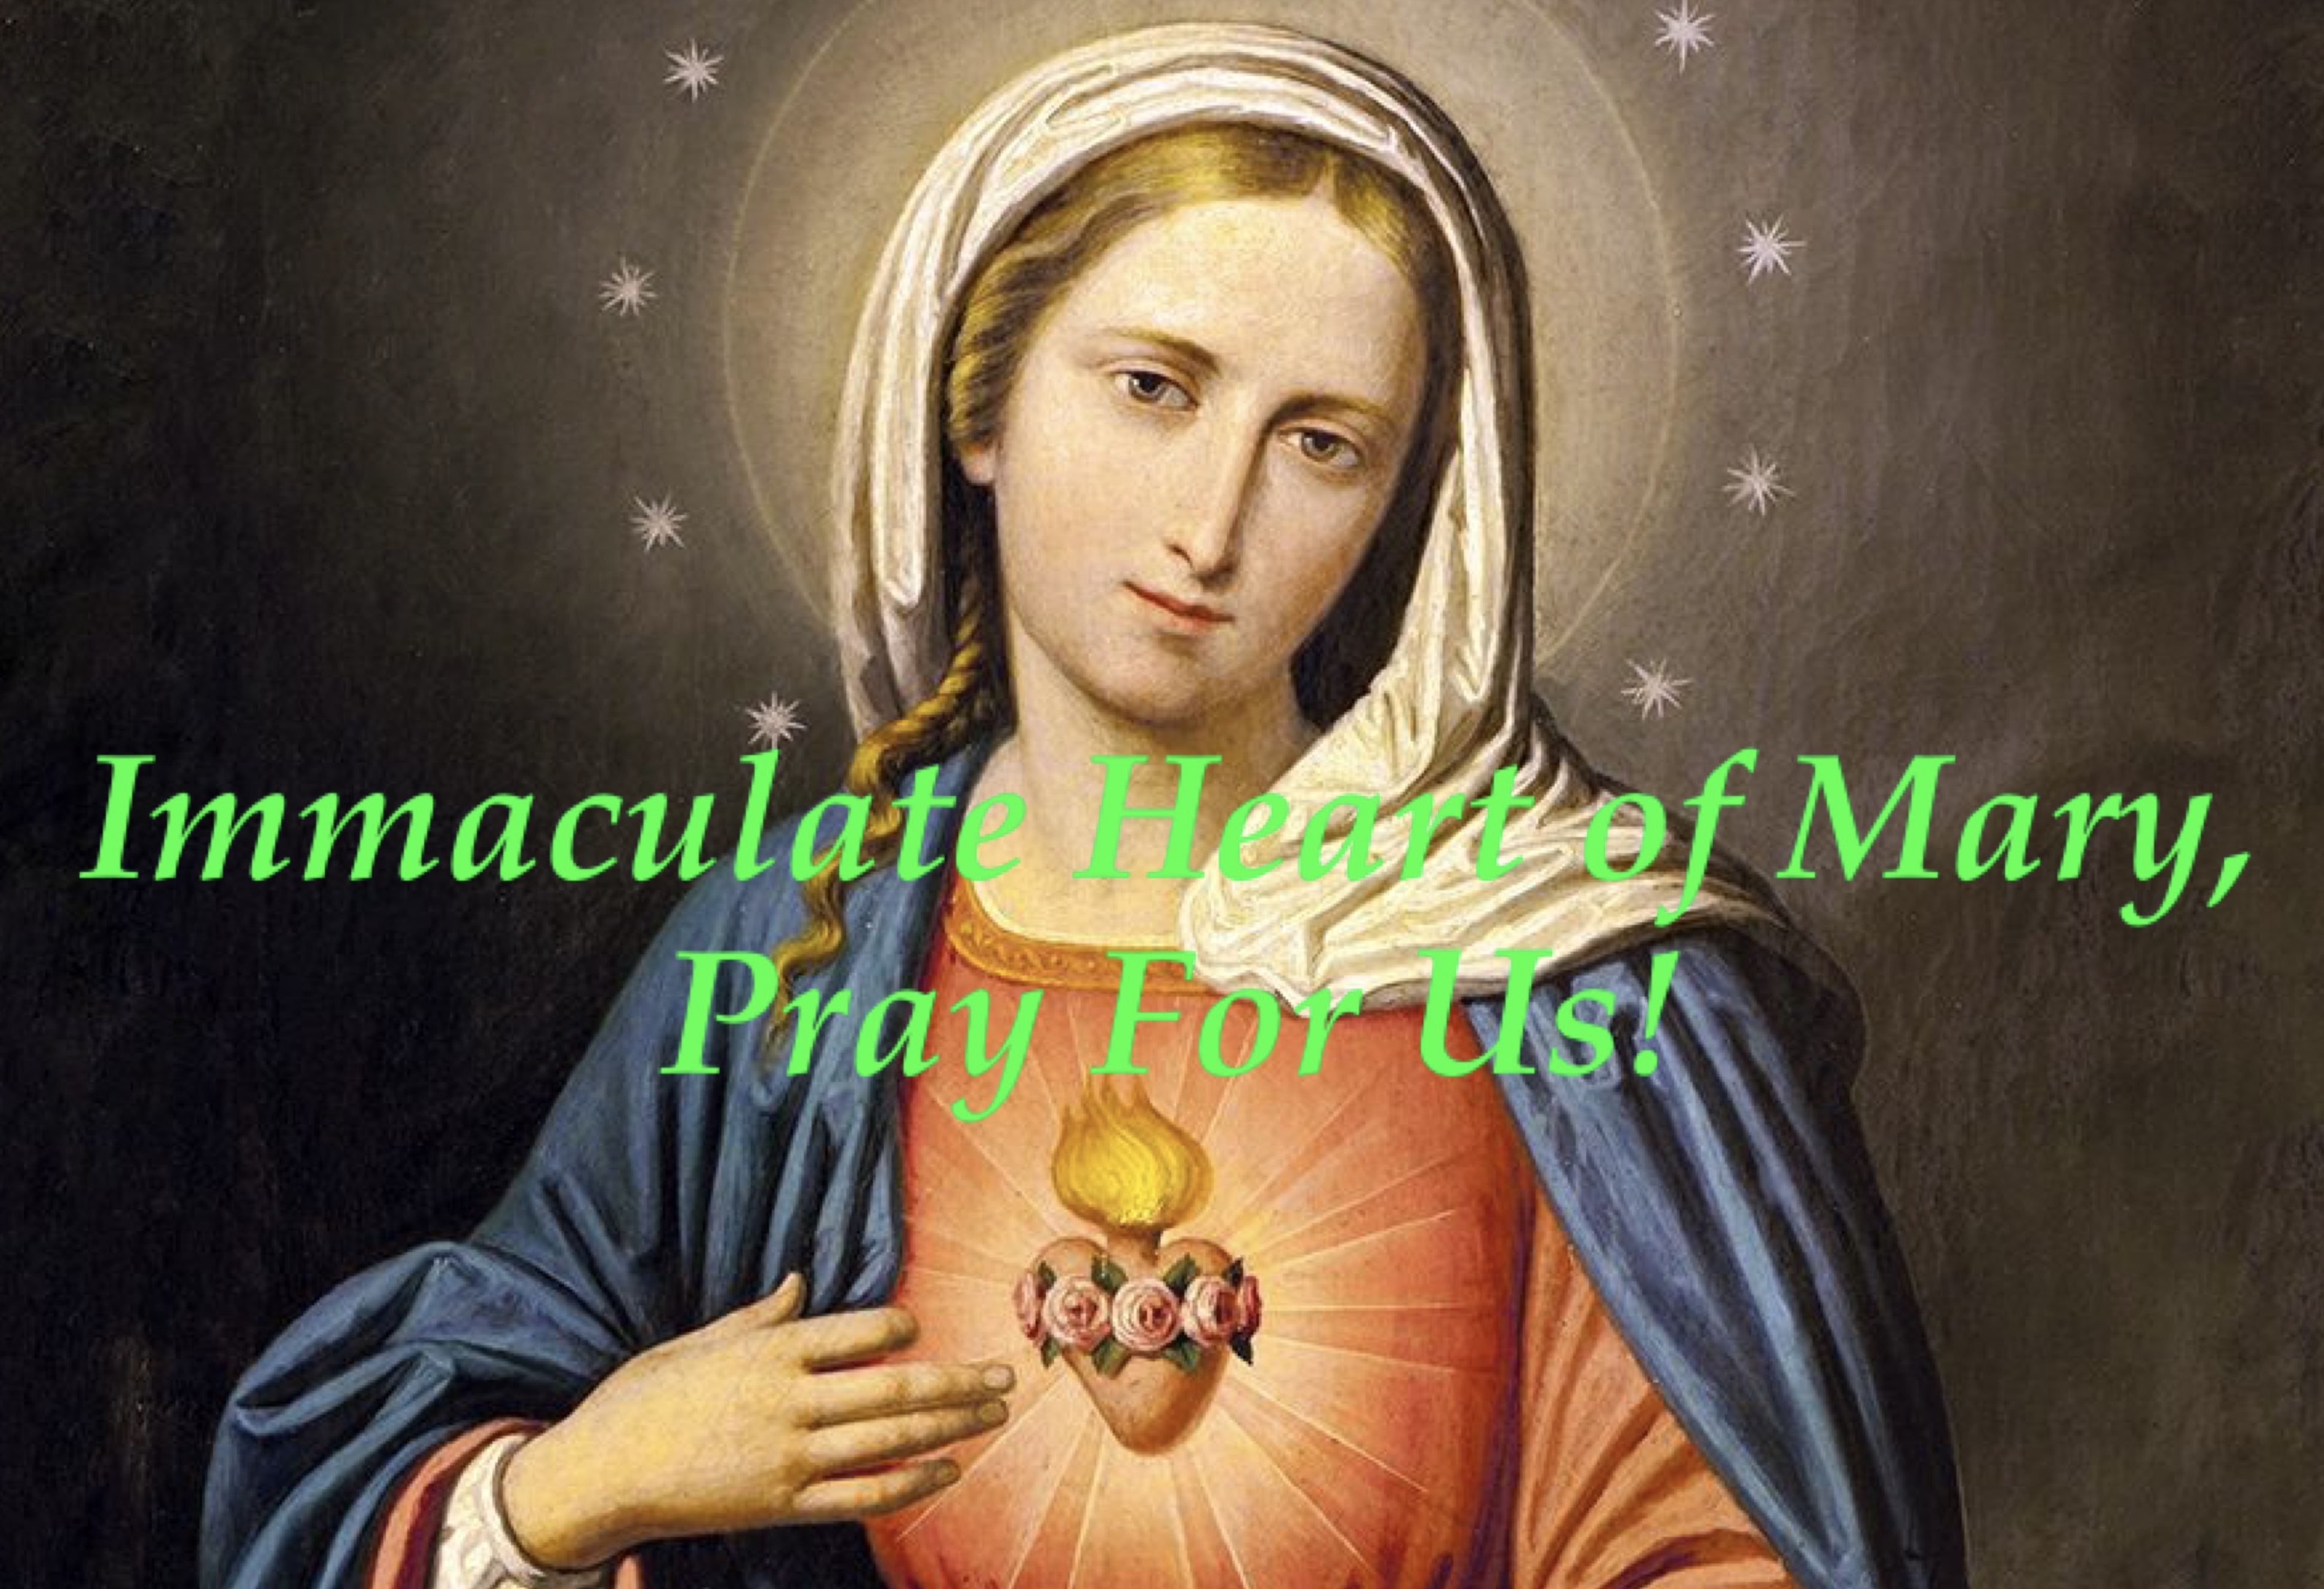 17th June - The Immaculate Heart of Mary